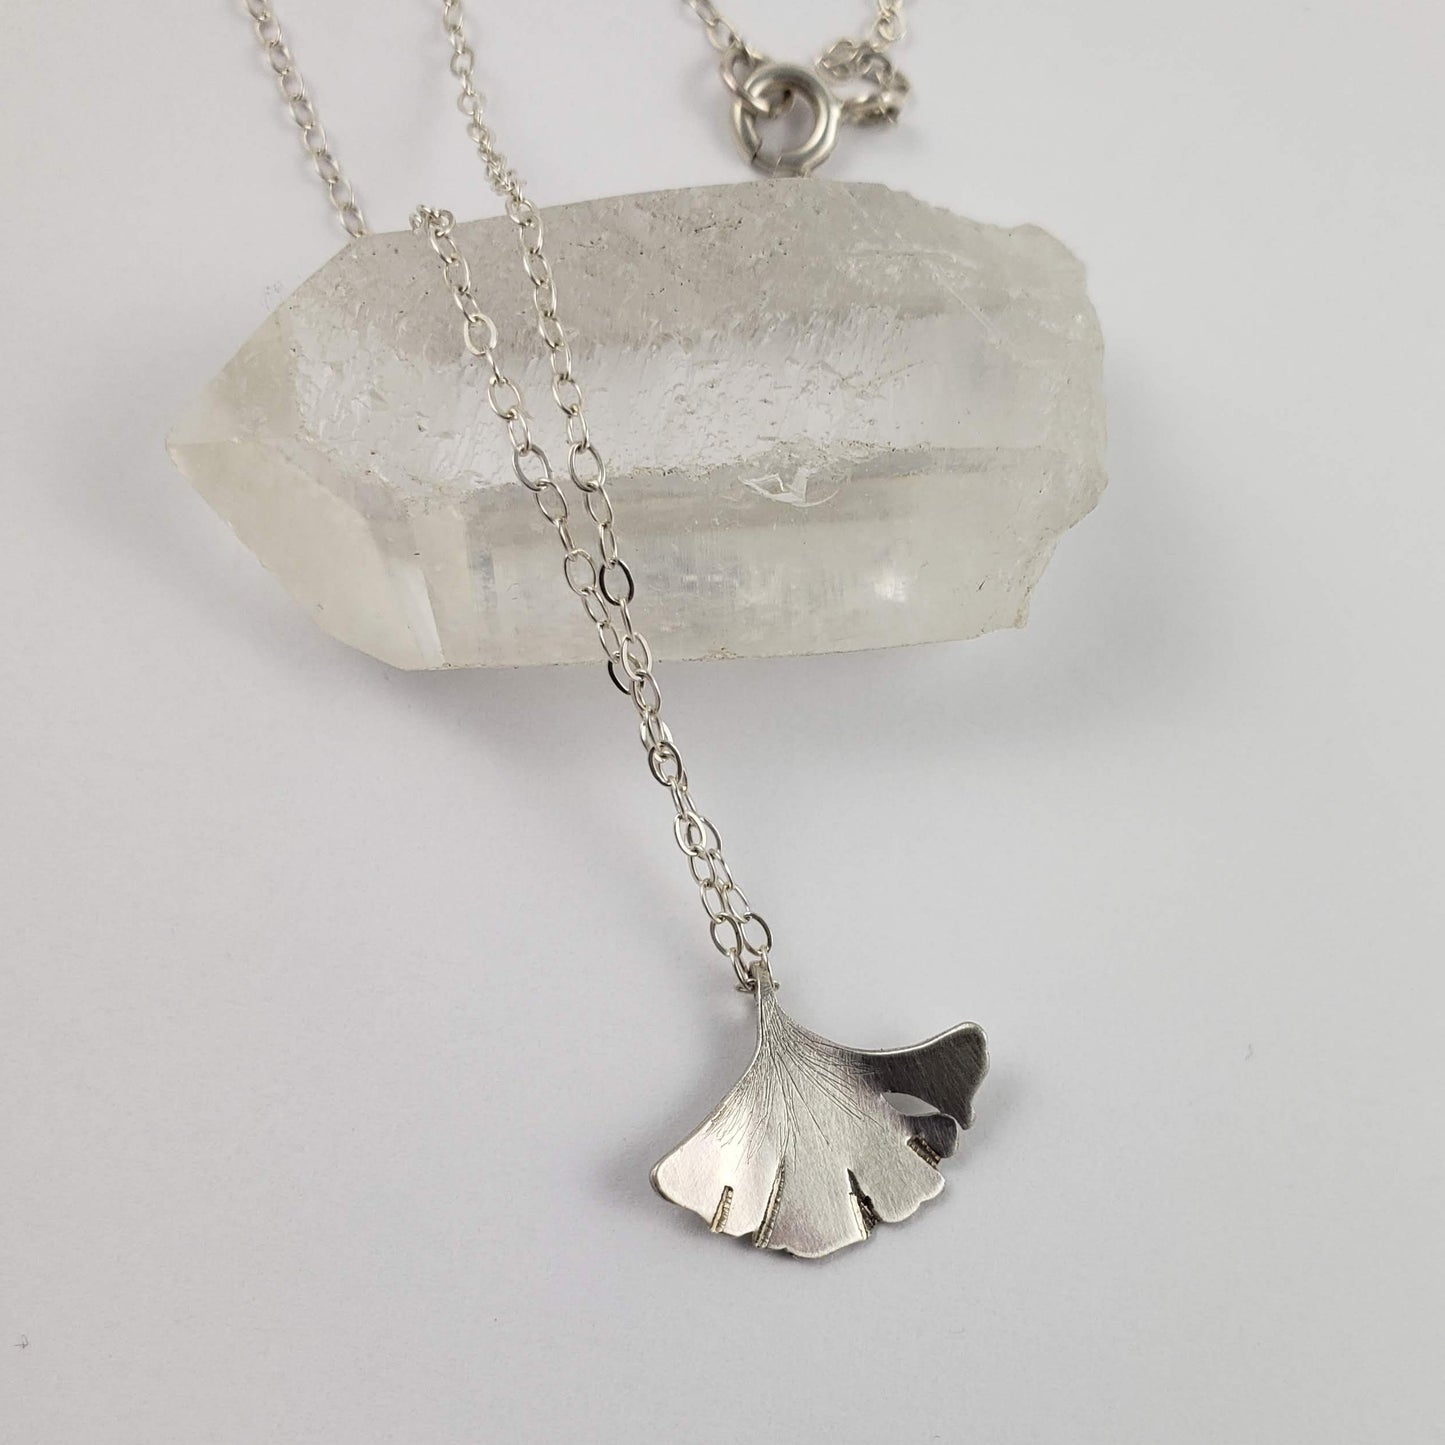 Small Gingko Leaf Necklace